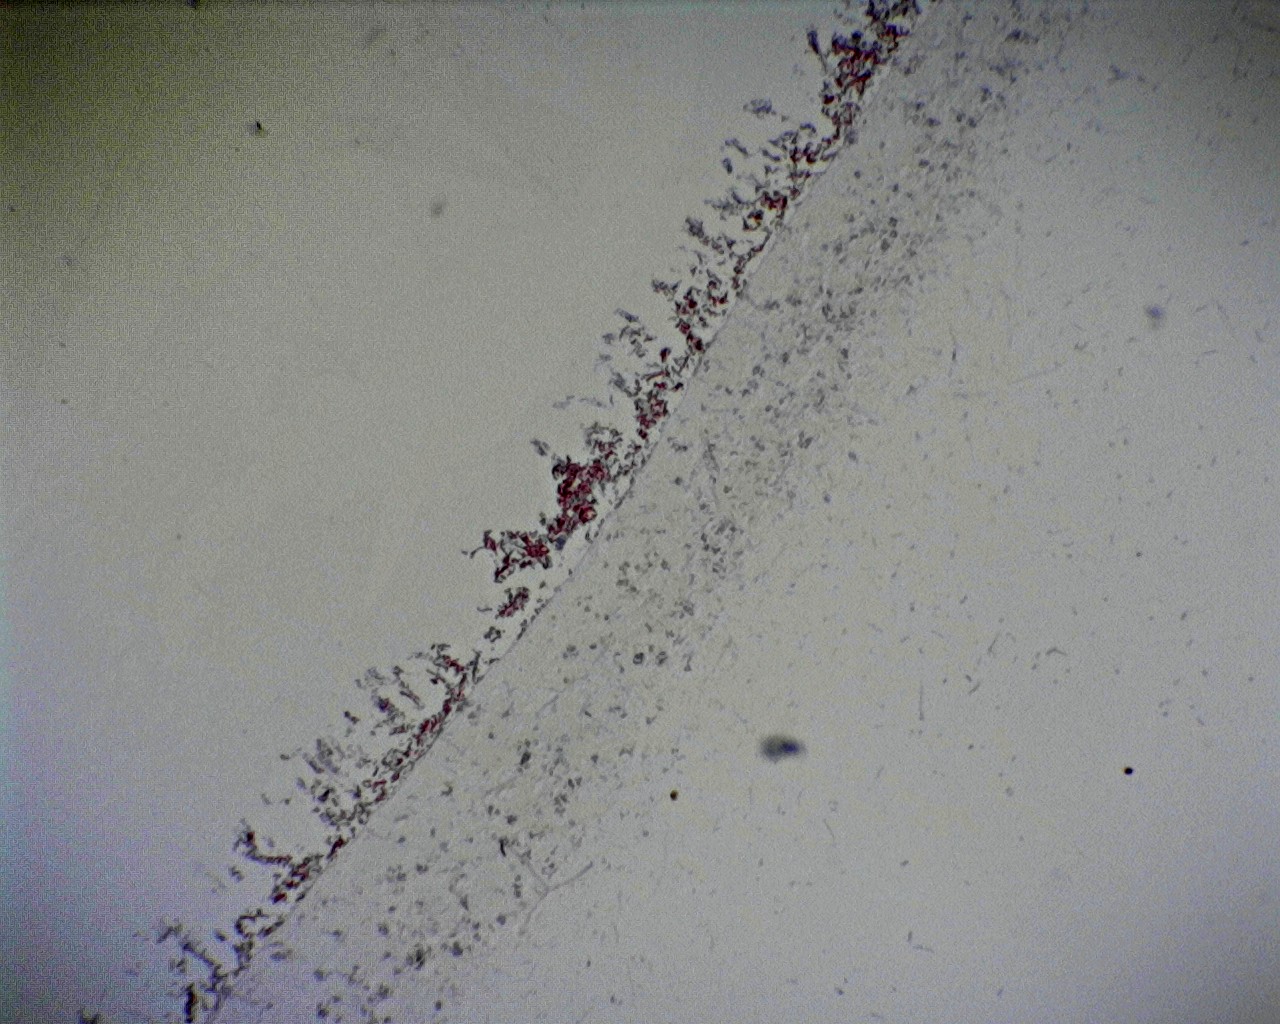 Penicillium Section With Hyphae And